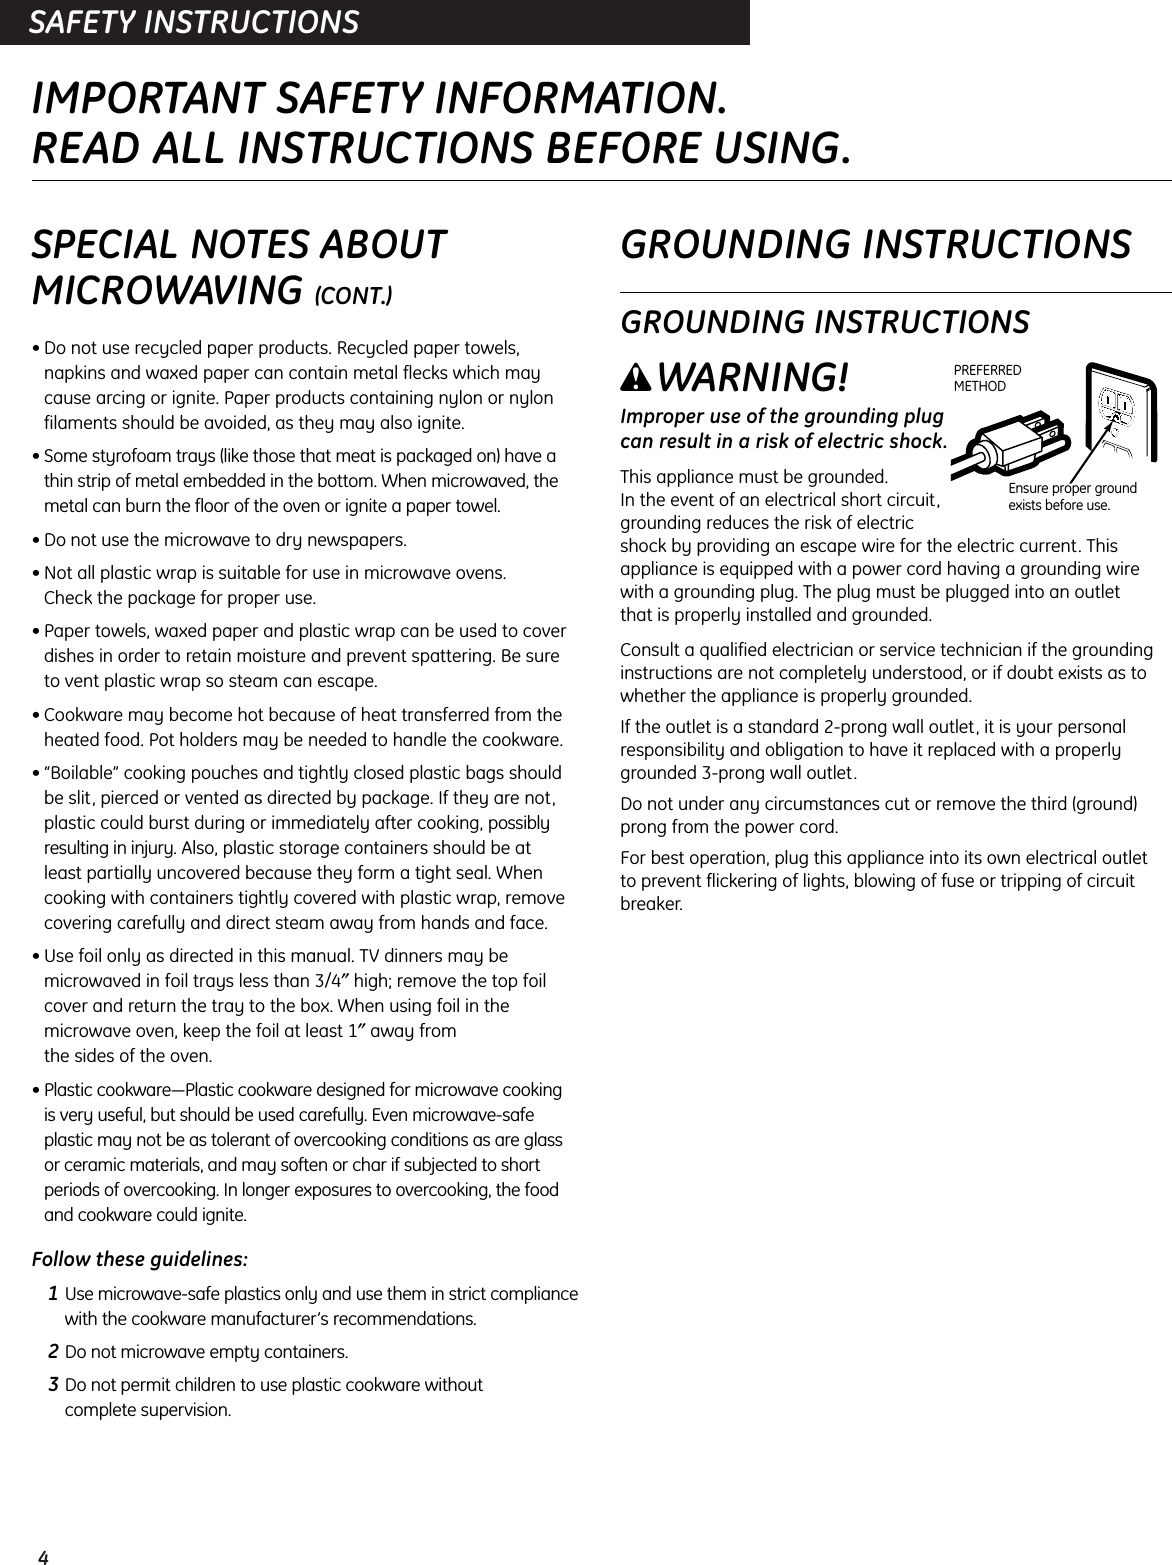 4SAFETY INSTRUCTIONSSPECIAL NOTES ABOUTMICROWAVING (CONT.)• Do not use recycled paper products. Recycled paper towels,napkins and waxed paper can contain metal flecks which maycause arcing or ignite. Paper products containing nylon or nylonfilaments should be avoided, as they may also ignite. • Some styrofoam trays (like those that meat is packaged on) have athin strip of metal embedded in the bottom. When microwaved, themetal can burn the floor of the oven or ignite a paper towel.• Do not use the microwave to dry newspapers.• Not all plastic wrap is suitable for use in microwave ovens. Check the package for proper use.• Paper towels, waxed paper and plastic wrap can be used to coverdishes in order to retain moisture and prevent spattering. Be sure to vent plastic wrap so steam can escape.• Cookware may become hot because of heat transferred from theheated food. Pot holders may be needed to handle the cookware.• “Boilable” cooking pouches and tightly closed plastic bags should be slit, pierced or vented as directed by package. If they are not,plastic could burst during or immediately after cooking, possiblyresulting in injury. Also, plastic storage containers should be at least partially uncovered because they form a tight seal. Whencooking with containers tightly covered with plastic wrap, removecovering carefully and direct steam away from hands and face.• Use foil only as directed in this manual. TV dinners may bemicrowaved in foil trays less than 3/4″high; remove the top foilcover and return the tray to the box. When using foil in themicrowave oven, keep the foil at least 1″away from the sides of the oven.• Plastic cookware—Plastic cookware designed for microwave cooking is very useful, but should be used carefully. Even microwave-safeplastic may not be as tolerant of overcooking conditions as are glassor ceramic materials, and may soften or char if subjected to shortperiods of overcooking. In longer exposures to overcooking, the foodand cookware could ignite. Follow these guidelines: 1Use microwave-safe plastics only and use them in strict compliance with the cookware manufacturer’s recommendations. 2Do not microwave empty containers. 3Do not permit children to use plastic cookware without complete supervision.GROUNDING INSTRUCTIONSGROUNDING INSTRUCTIONSwWARNING!Improper use of the grounding plugcan result in a risk of electric shock.This appliance must be grounded. In the event of an electrical short circuit,grounding reduces the risk of electricshock by providing an escape wire for the electric current. Thisappliance is equipped with a power cord having a grounding wirewith a grounding plug. The plug must be plugged into an outlet that is properly installed and grounded.Consult a qualified electrician or service technician if the groundinginstructions are not completely understood, or if doubt exists as towhether the appliance is properly grounded.If the outlet is a standard 2-prong wall outlet, it is your personalresponsibility and obligation to have it replaced with a properlygrounded 3-prong wall outlet.Do not under any circumstances cut or remove the third (ground)prong from the power cord.For best operation, plug this appliance into its own electrical outlet to prevent flickering of lights, blowing of fuse or tripping of circuitbreaker.IMPORTANT SAFETY INFORMATION.READ ALL INSTRUCTIONS BEFORE USING.Ensure proper groundexists before use.PREFERREDMETHOD